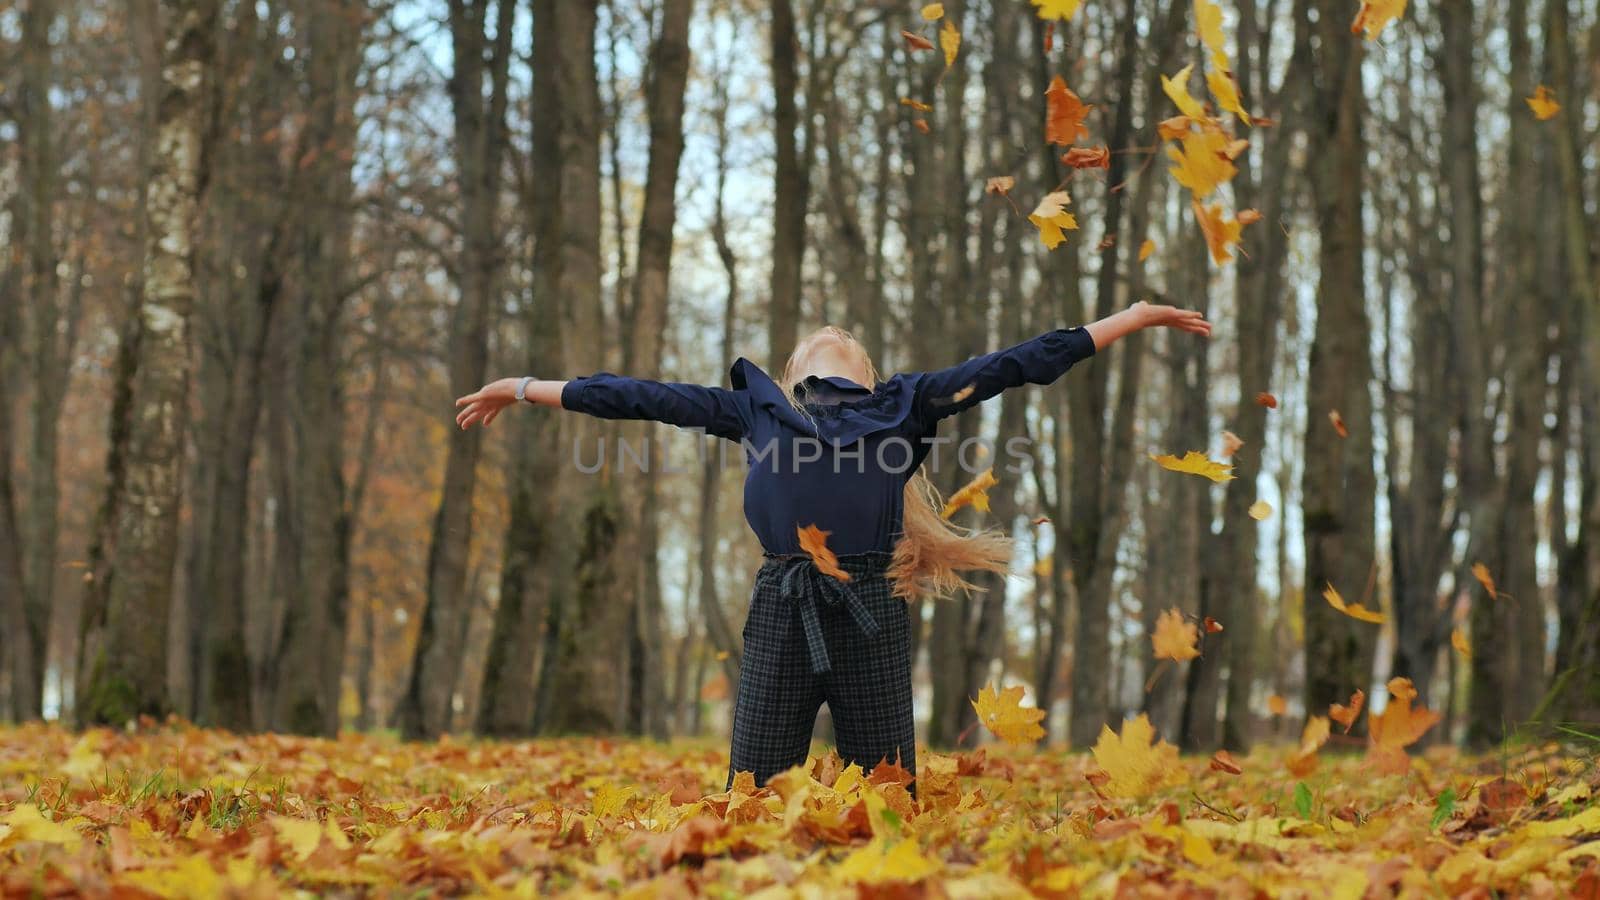 A young girl schoolgirl throws autumn leaves in a city park